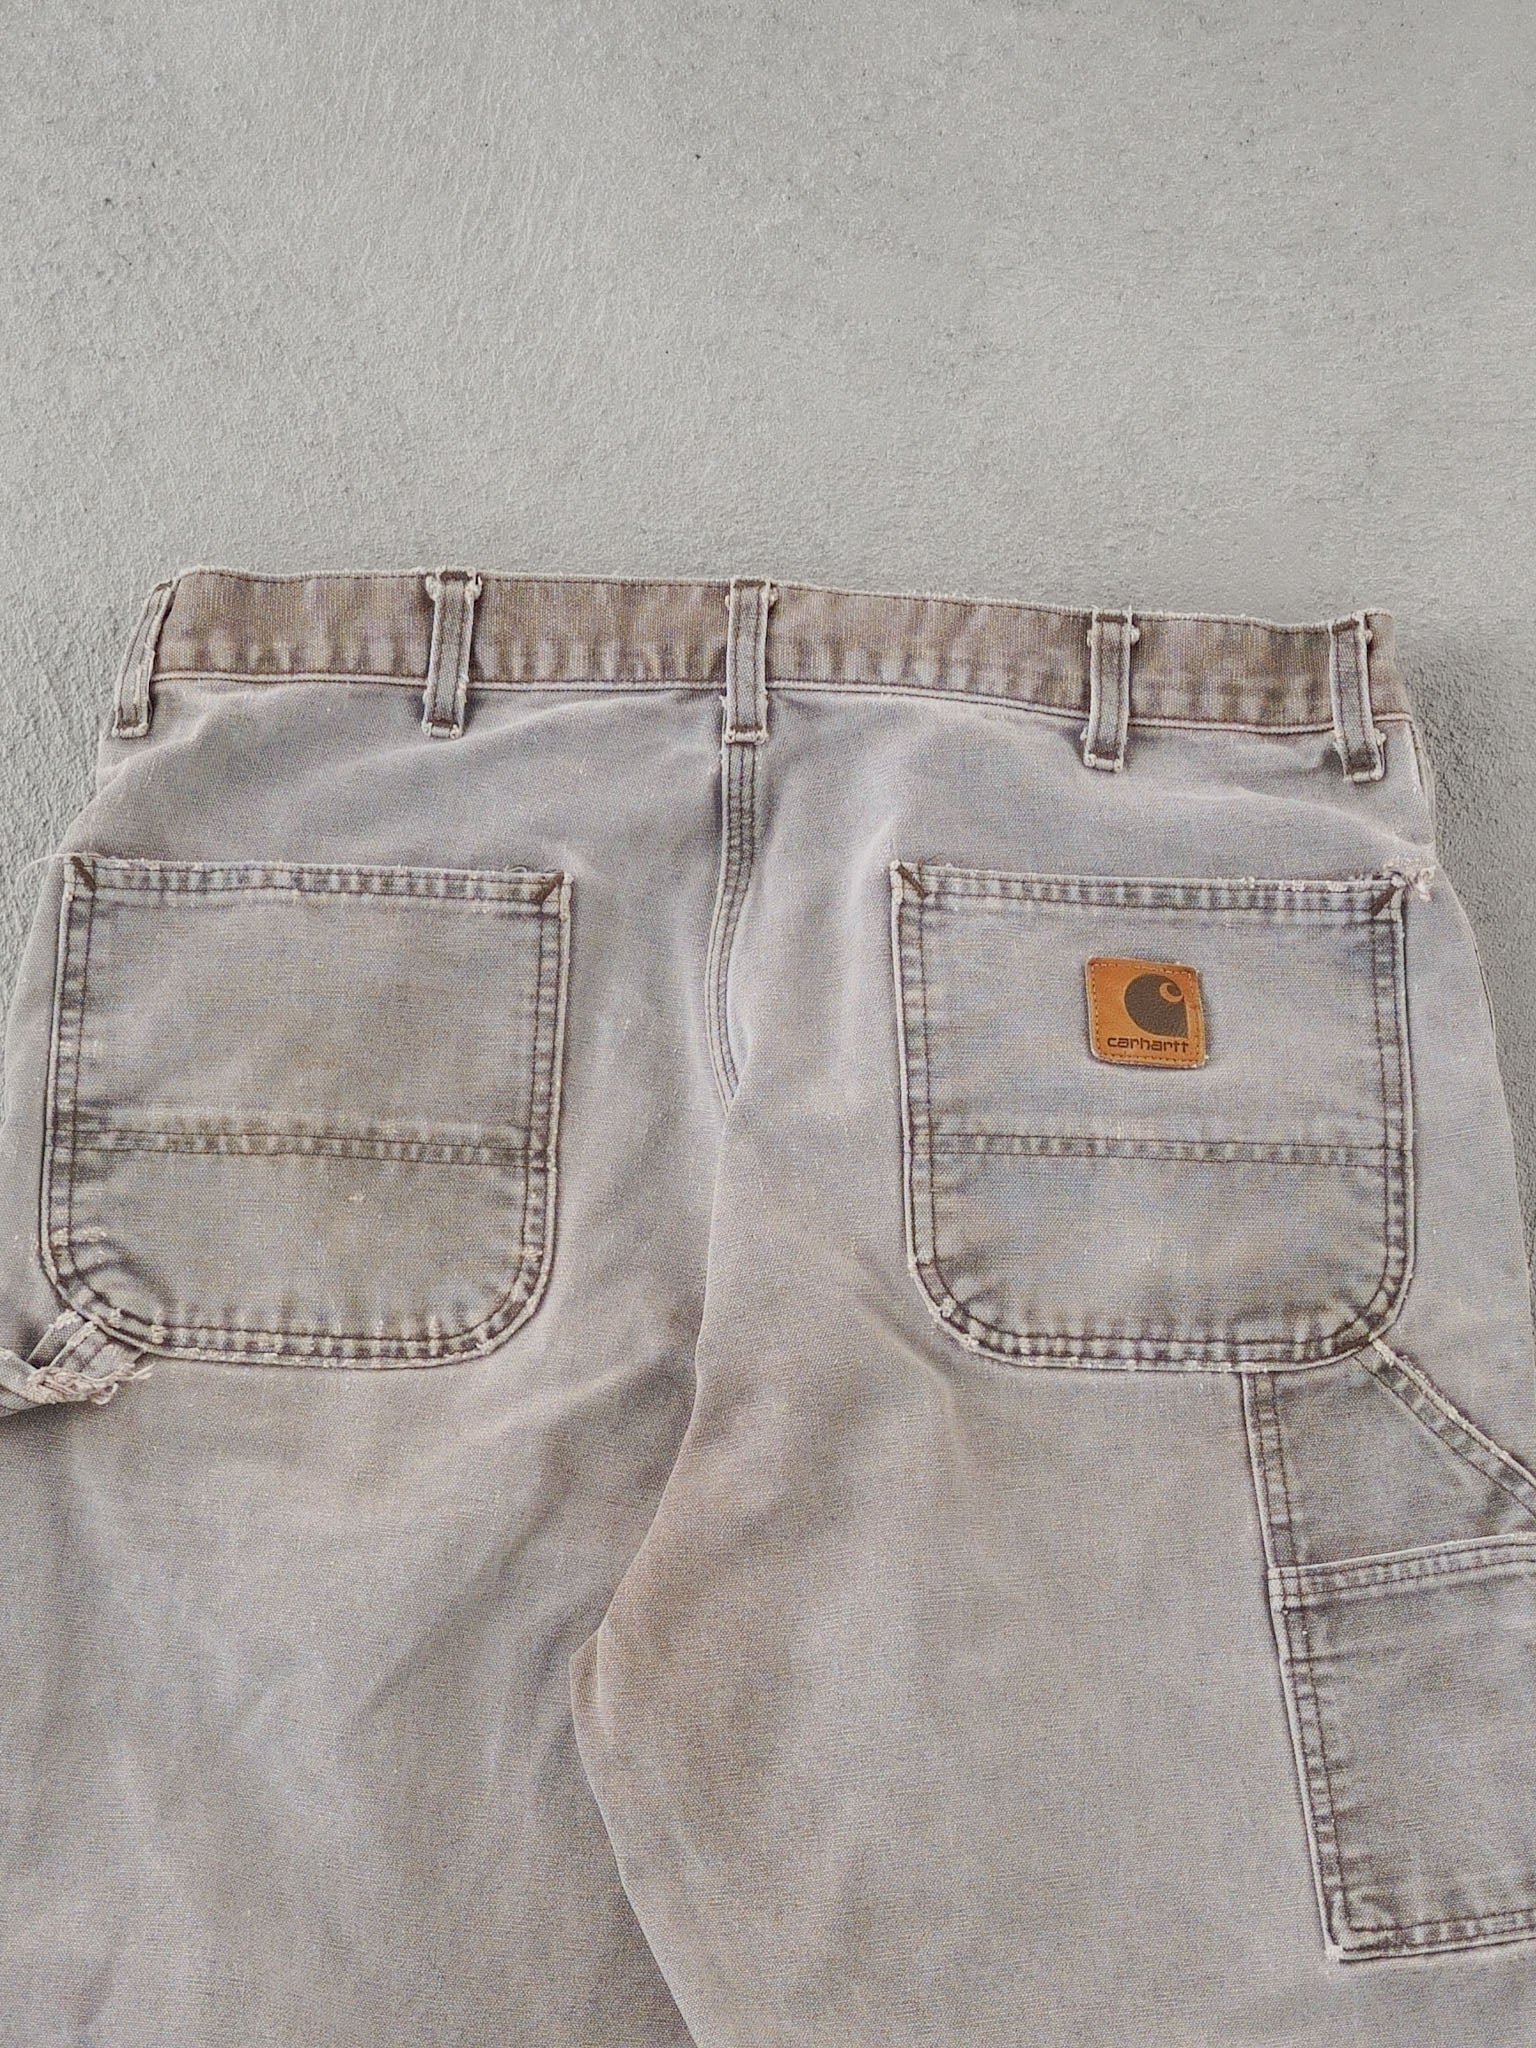 Vintage 90s Washed Light Brown Faded Carhartt Carpenter Pants (38x30)